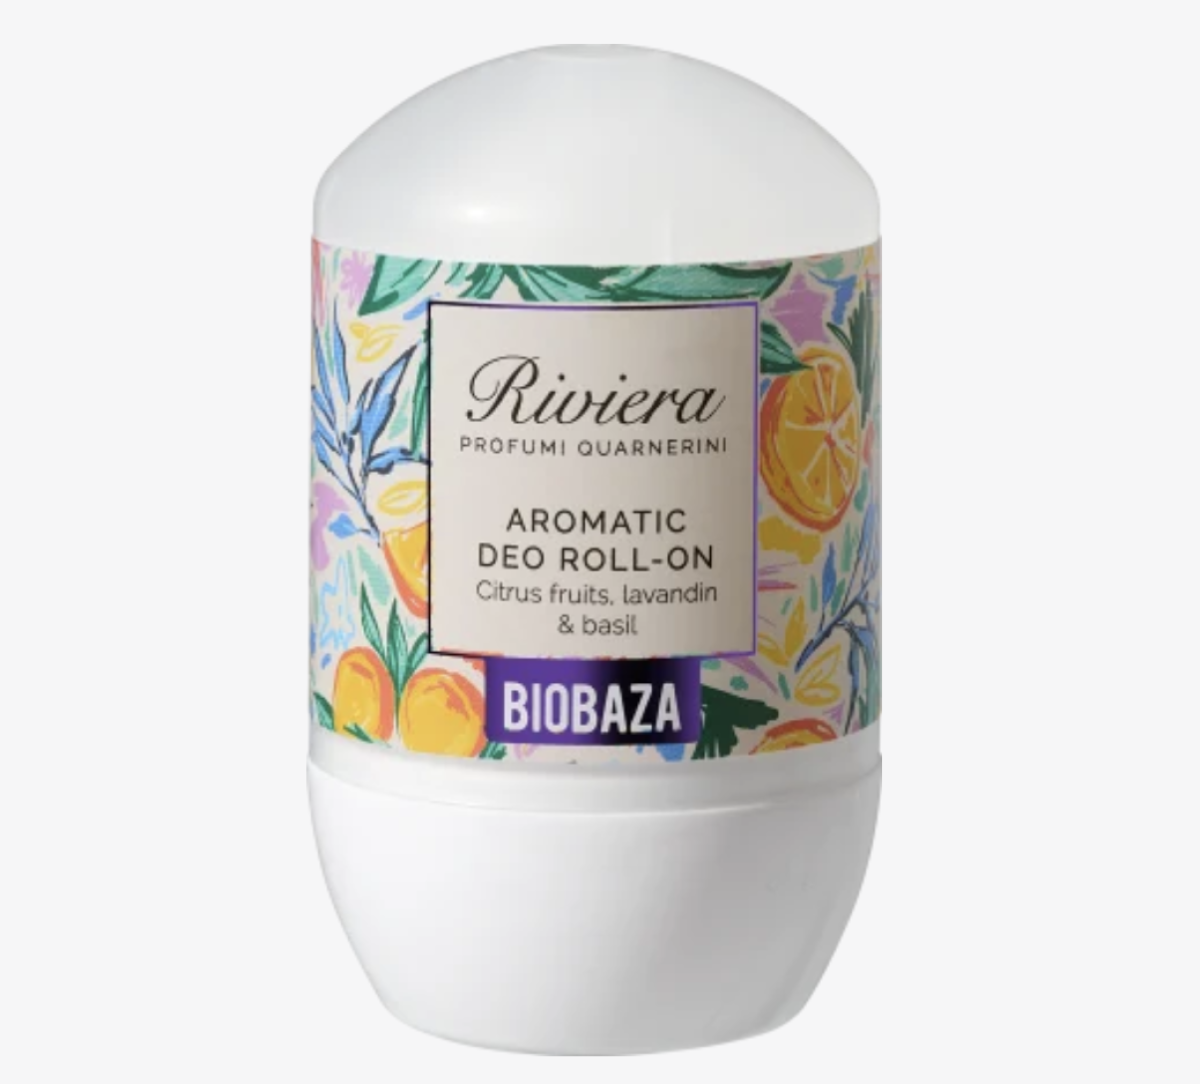 riviera aromatic deo roll on